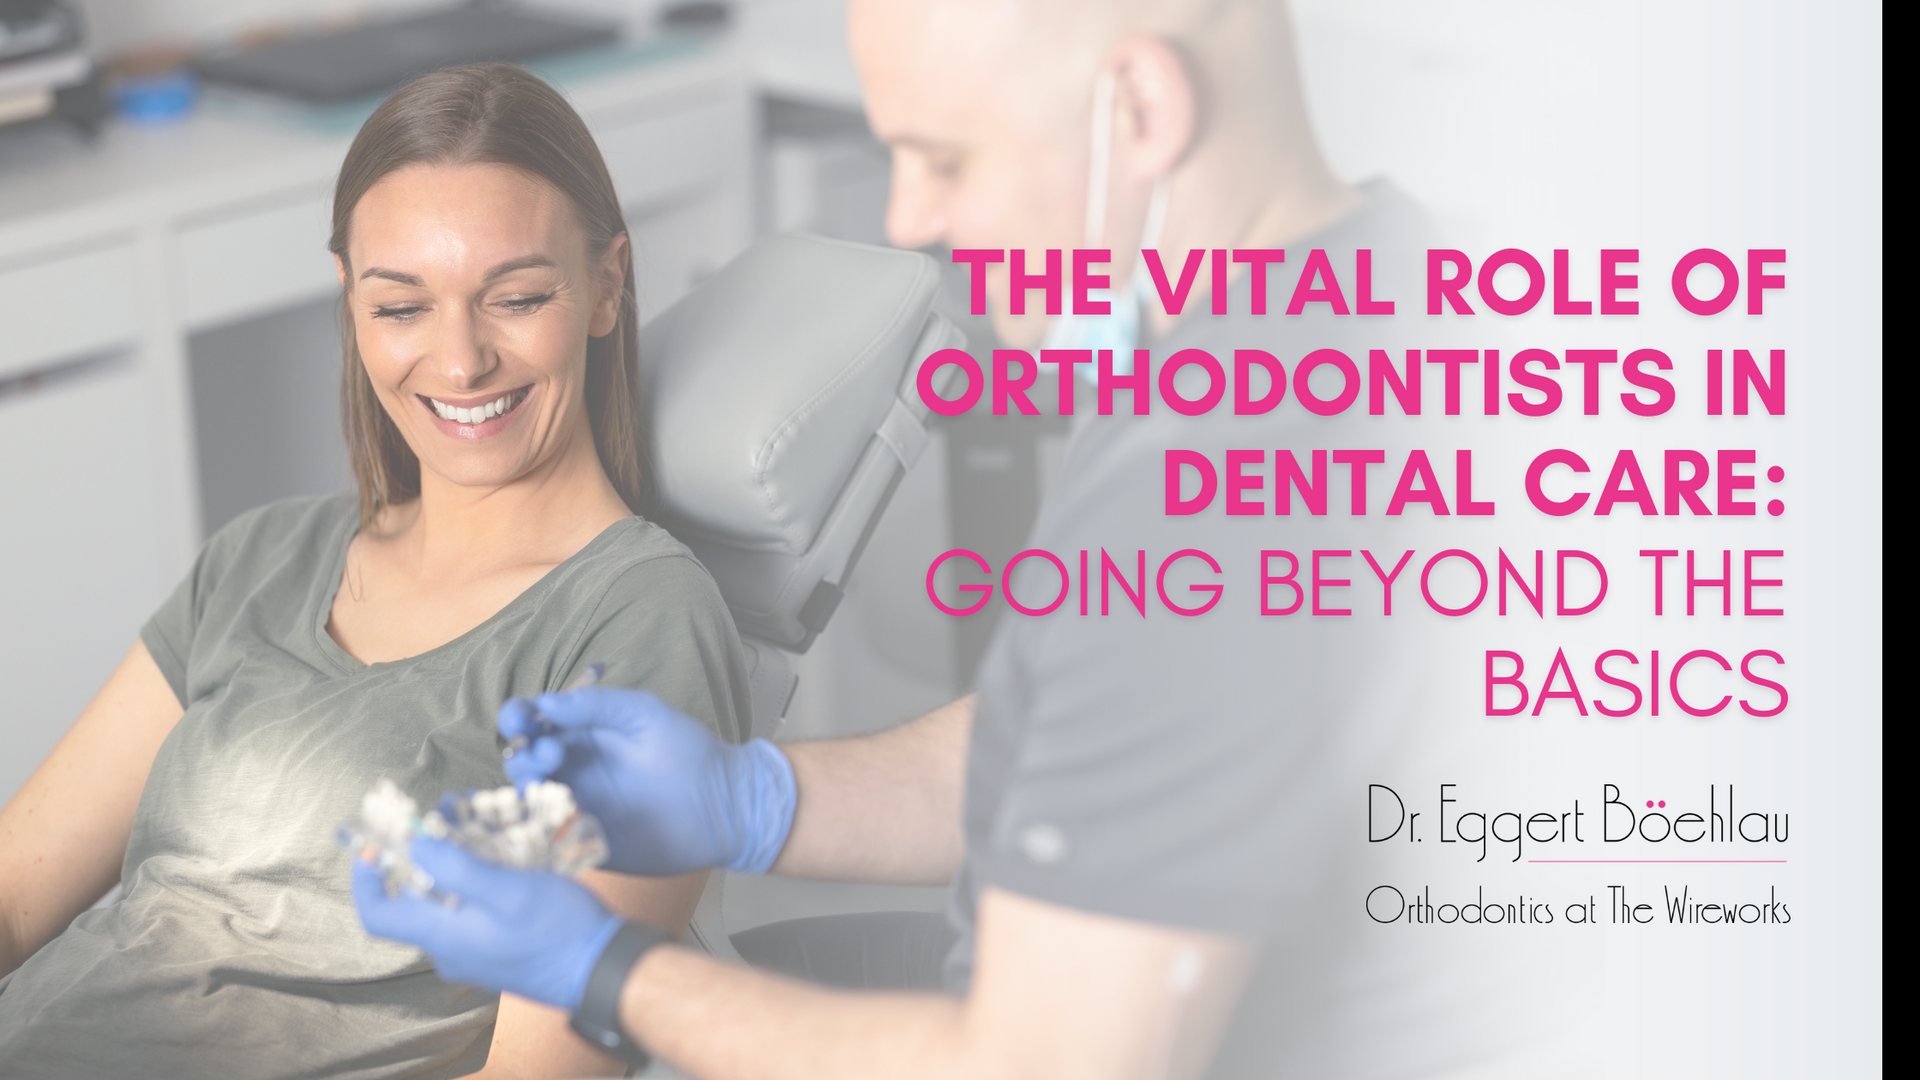 The vital role of orthodontists in dental care : going beyond the basics